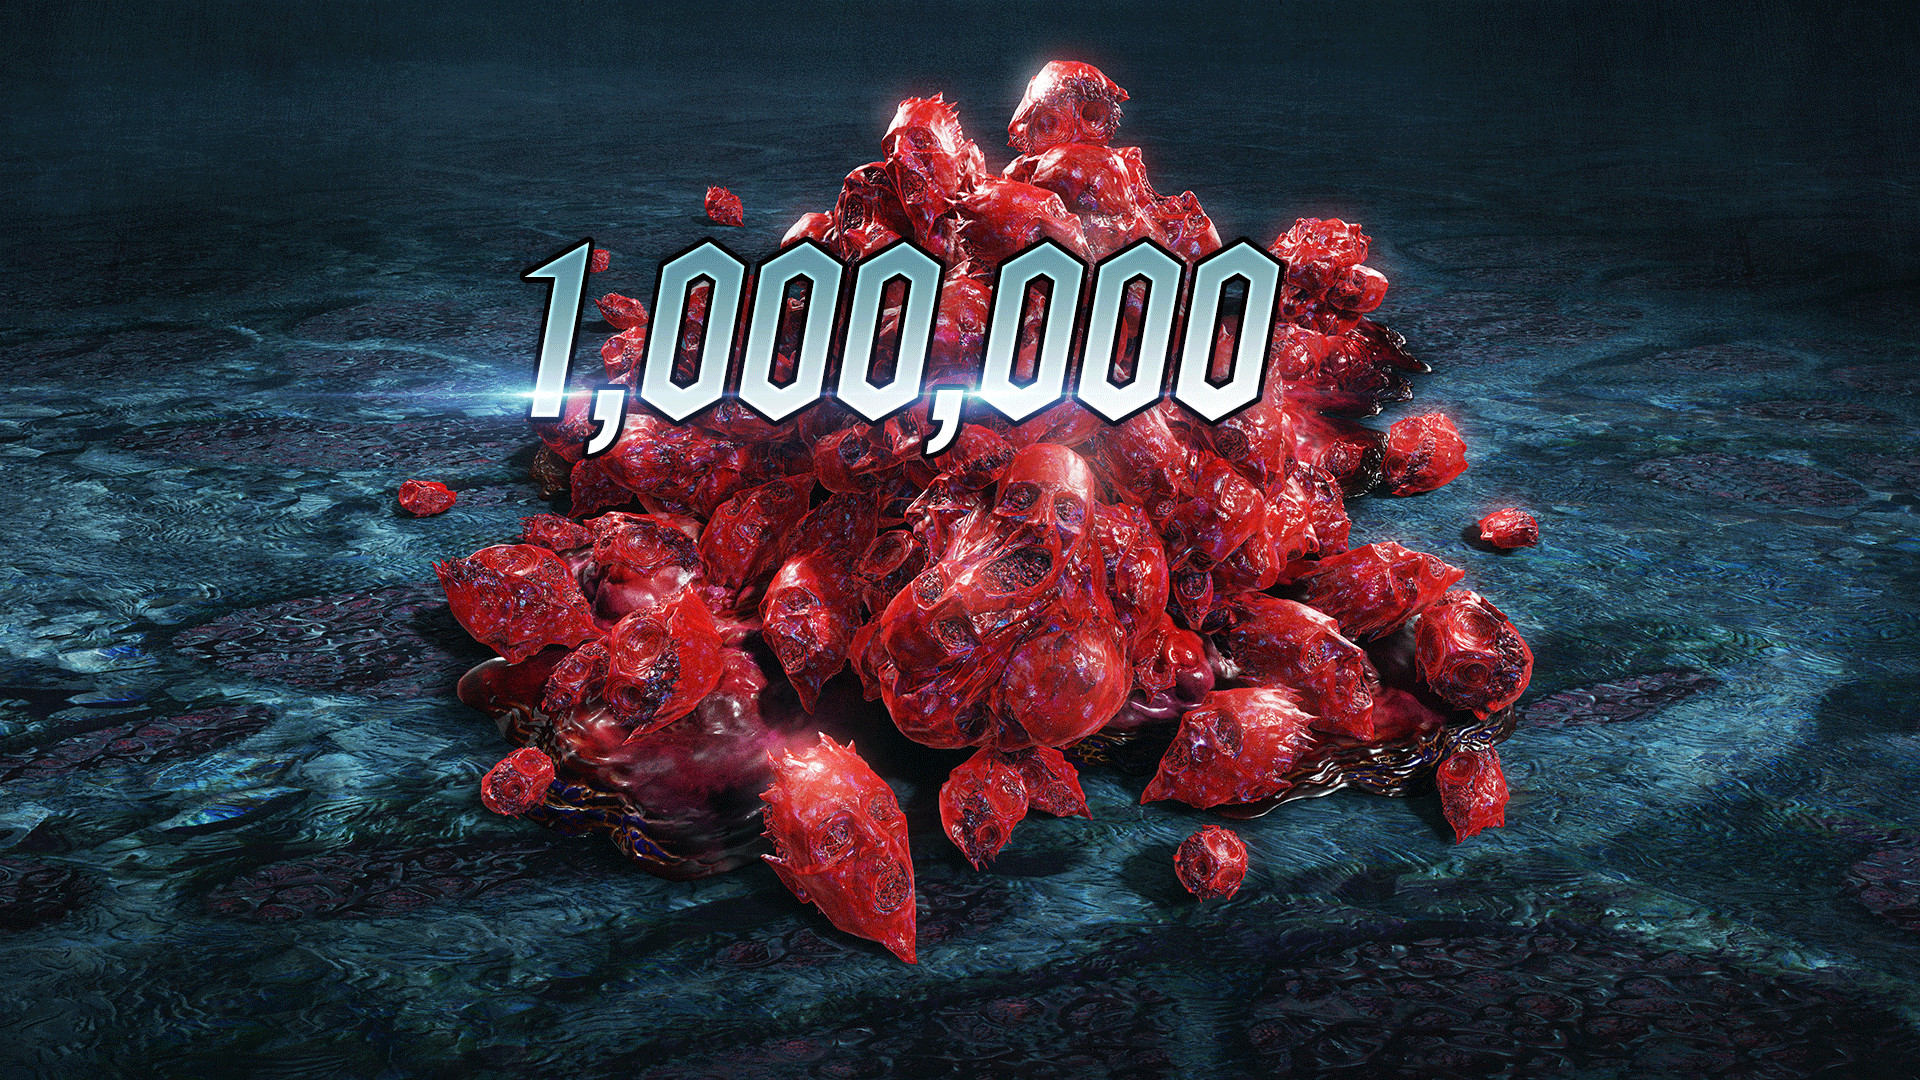 Devil May Cry 5 - 1000000 Red Orbs Featured Screenshot #1